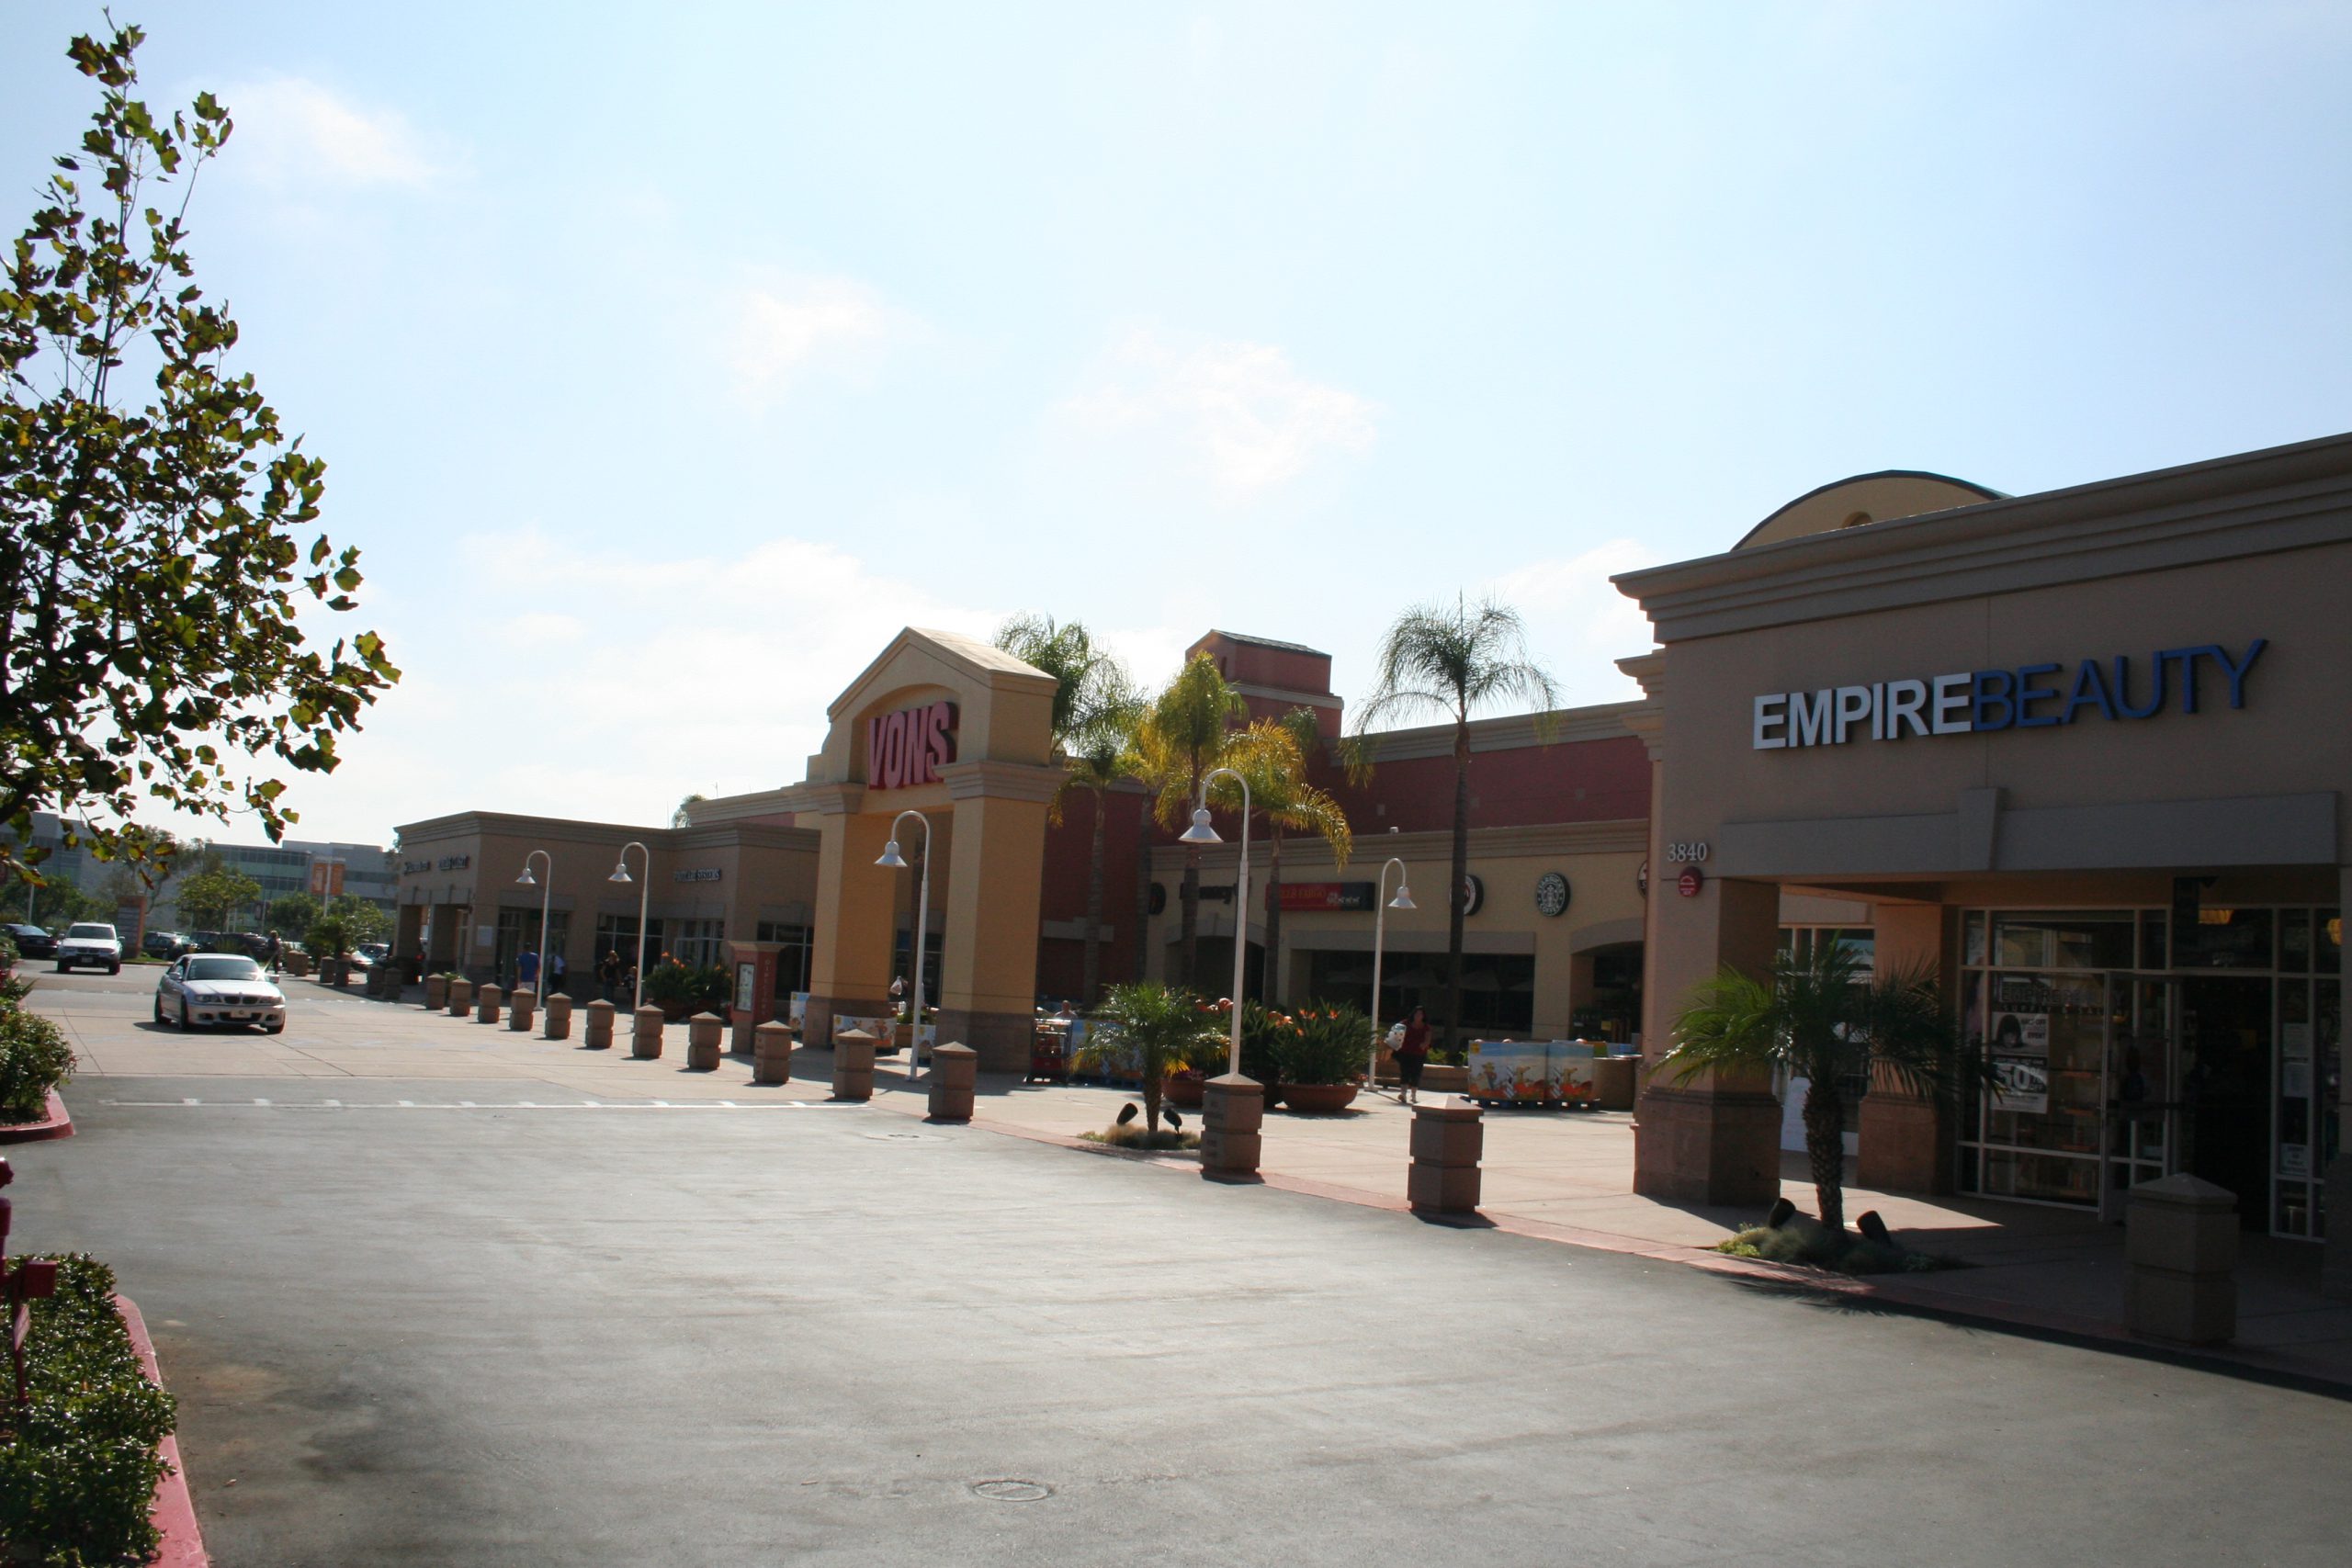 Vons and Empire Beauty at Piazza Carmel Shopping Center, San Diego, CA